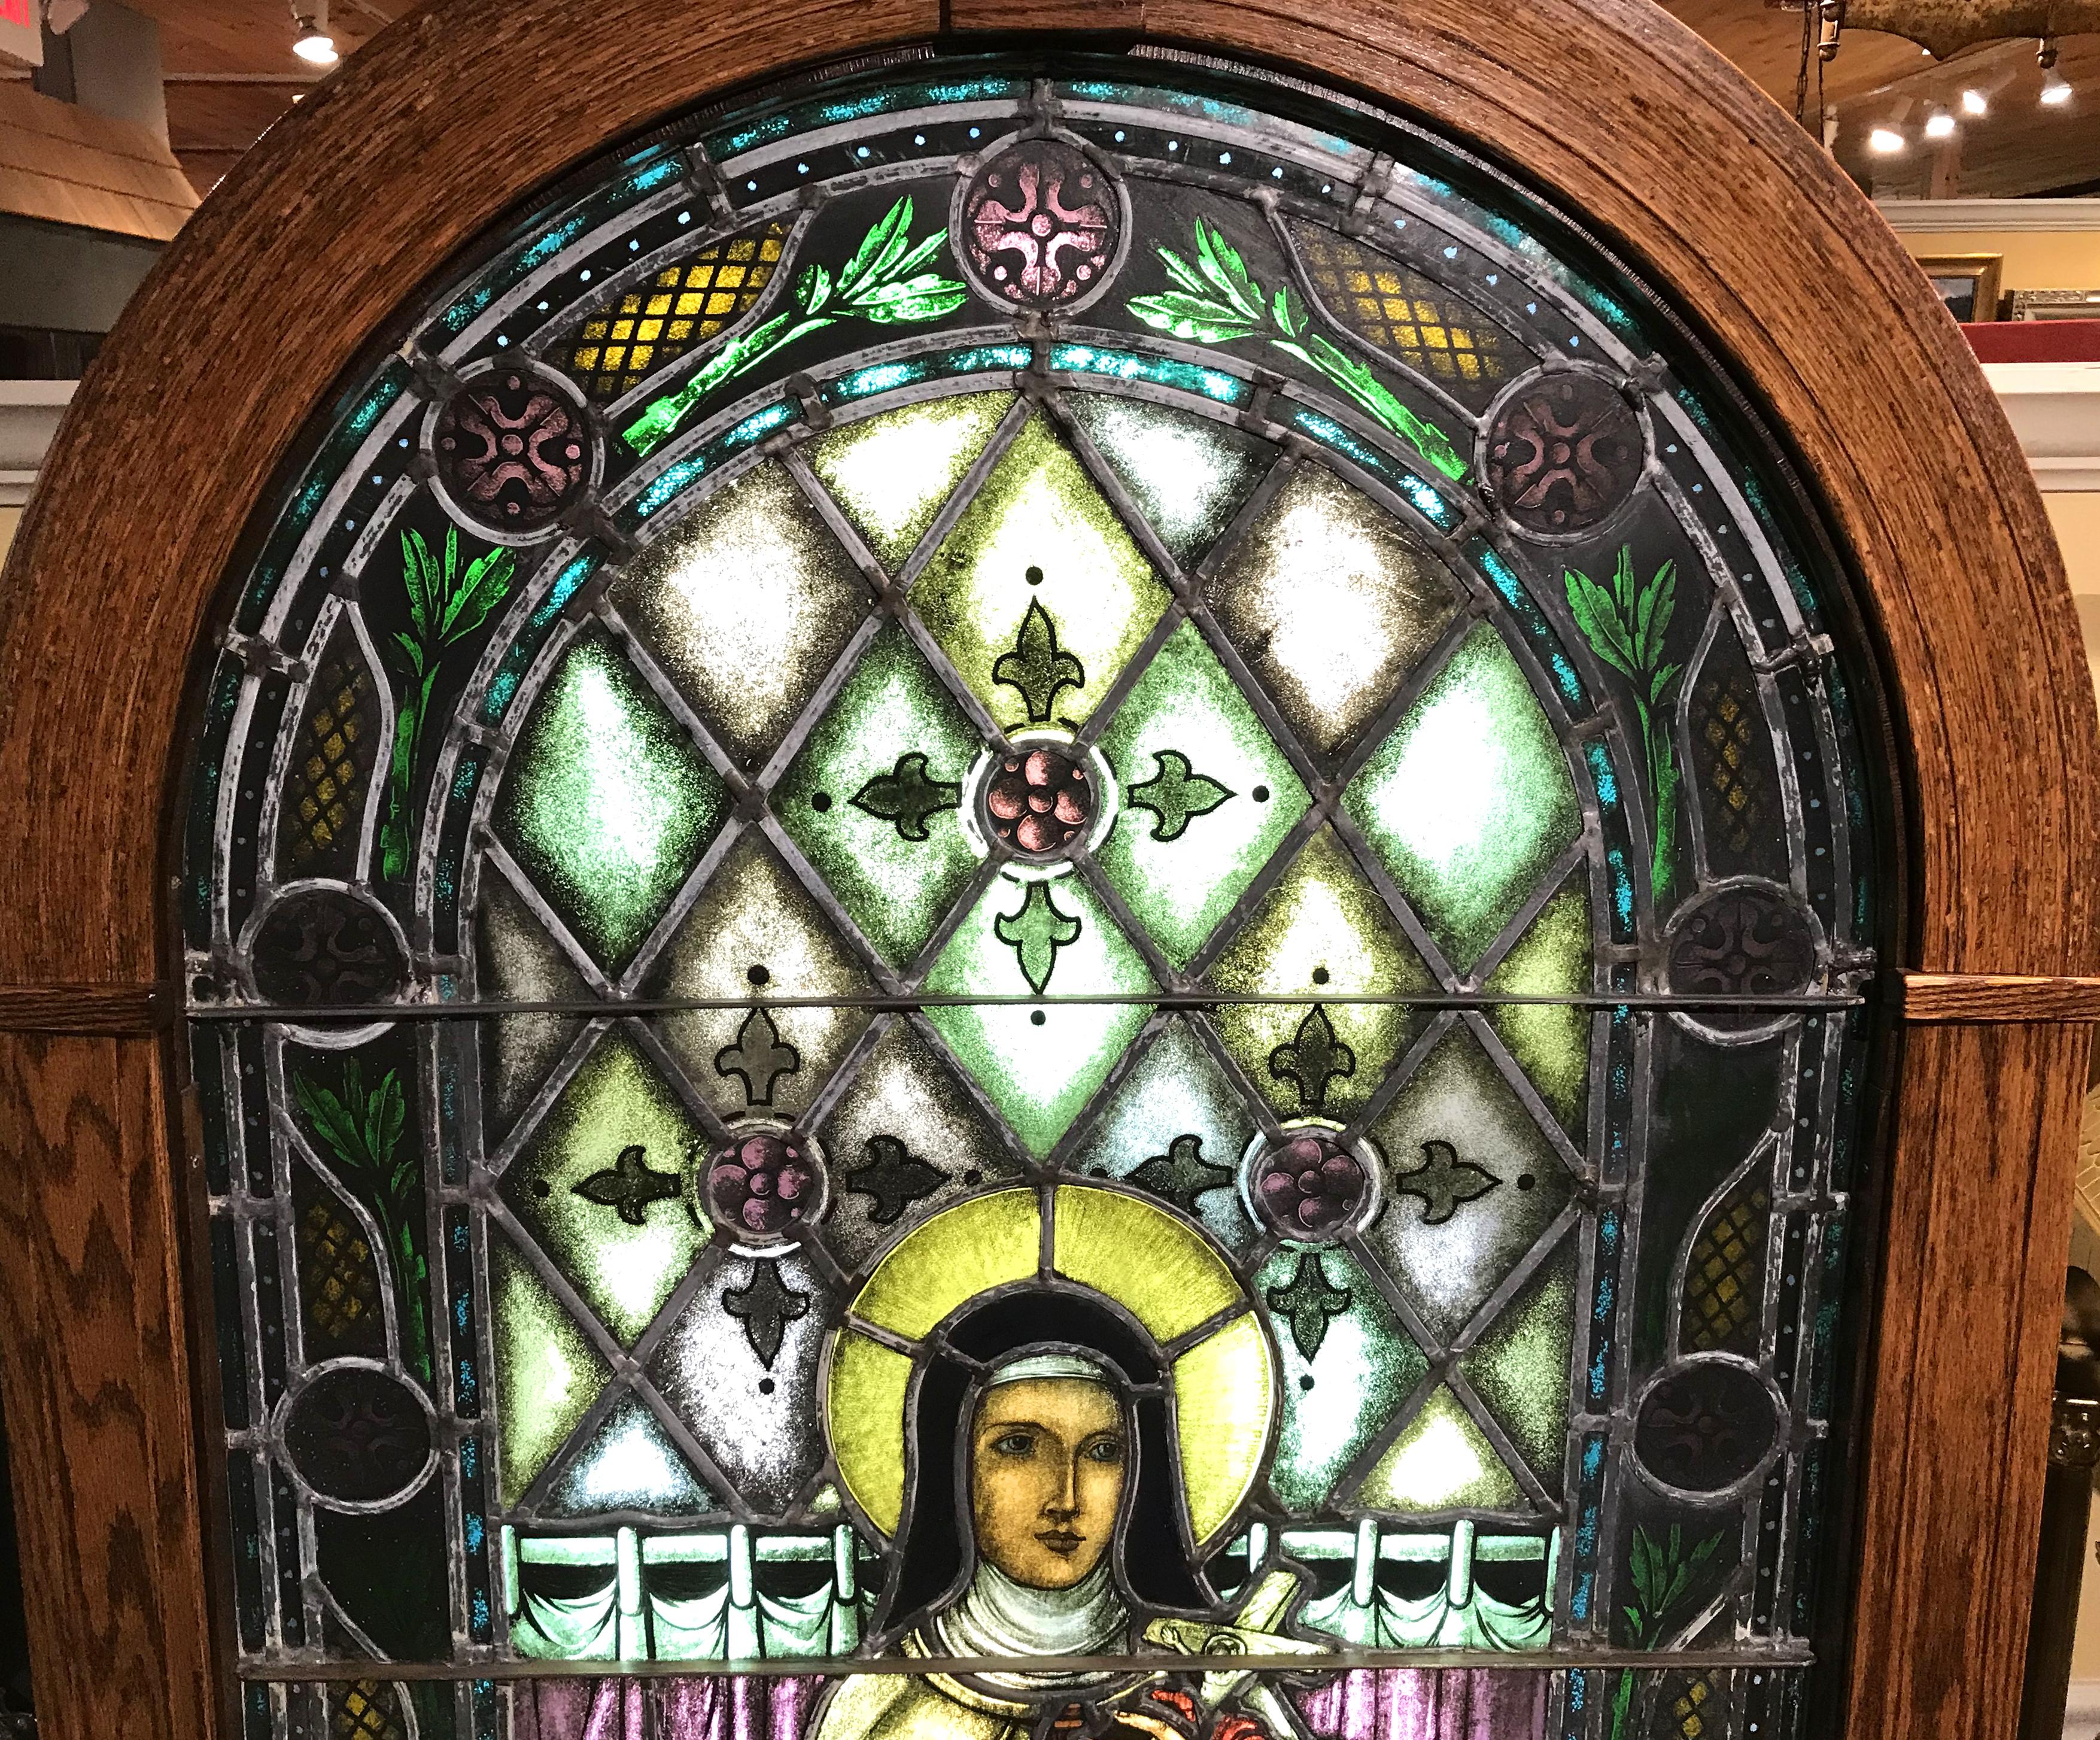 A splendid arched leaded stained glass window featuring Saint Thérèse de L’Enfant Jesus, commonly known as Saint Therese of the Child Jesus and the Holy Face, Saint Thérèse of Lisieux, or “The Little Flower”. She was born Marie Françoise-Therese